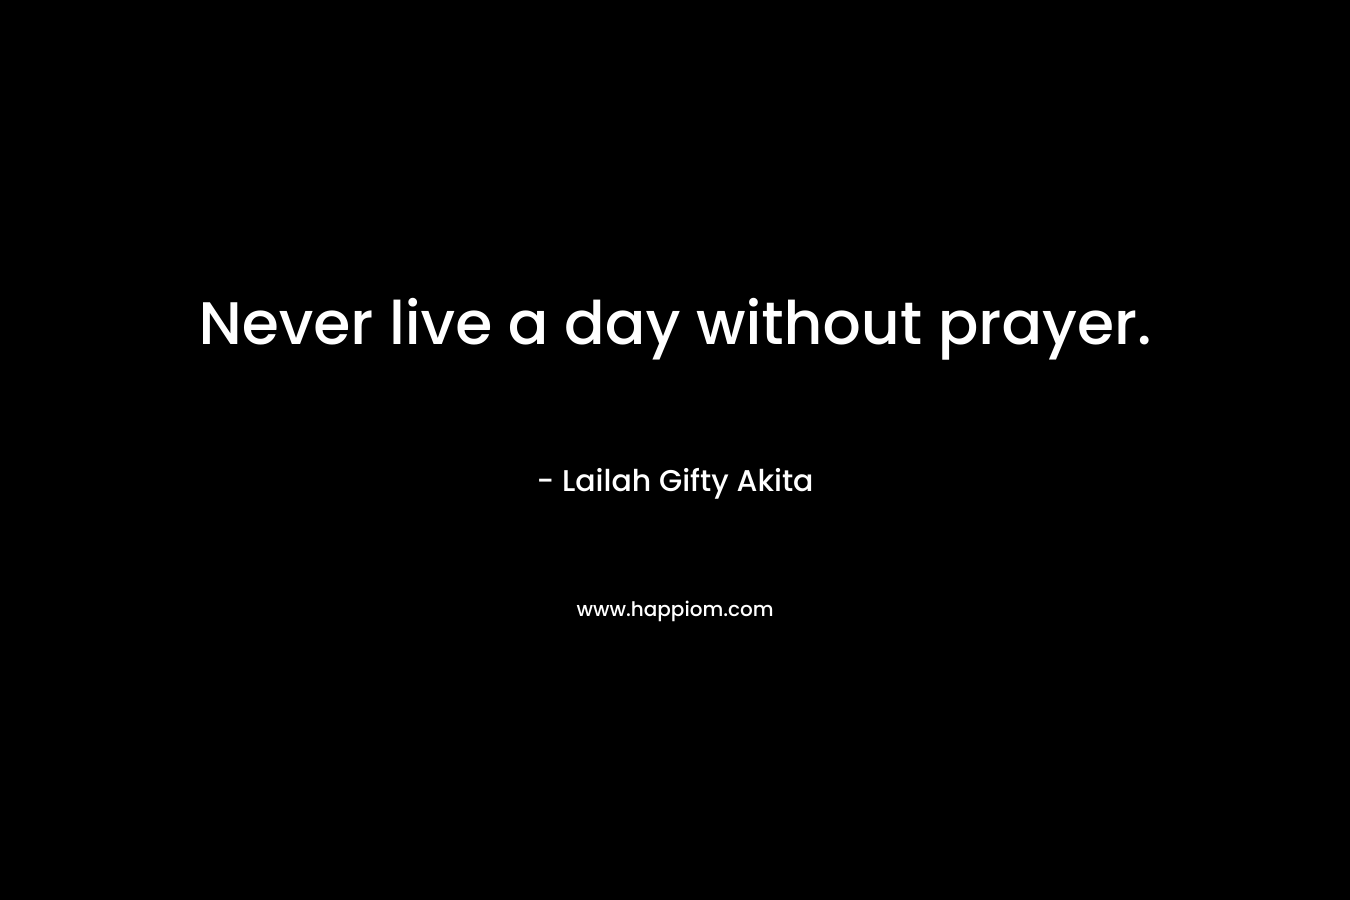 Never live a day without prayer.